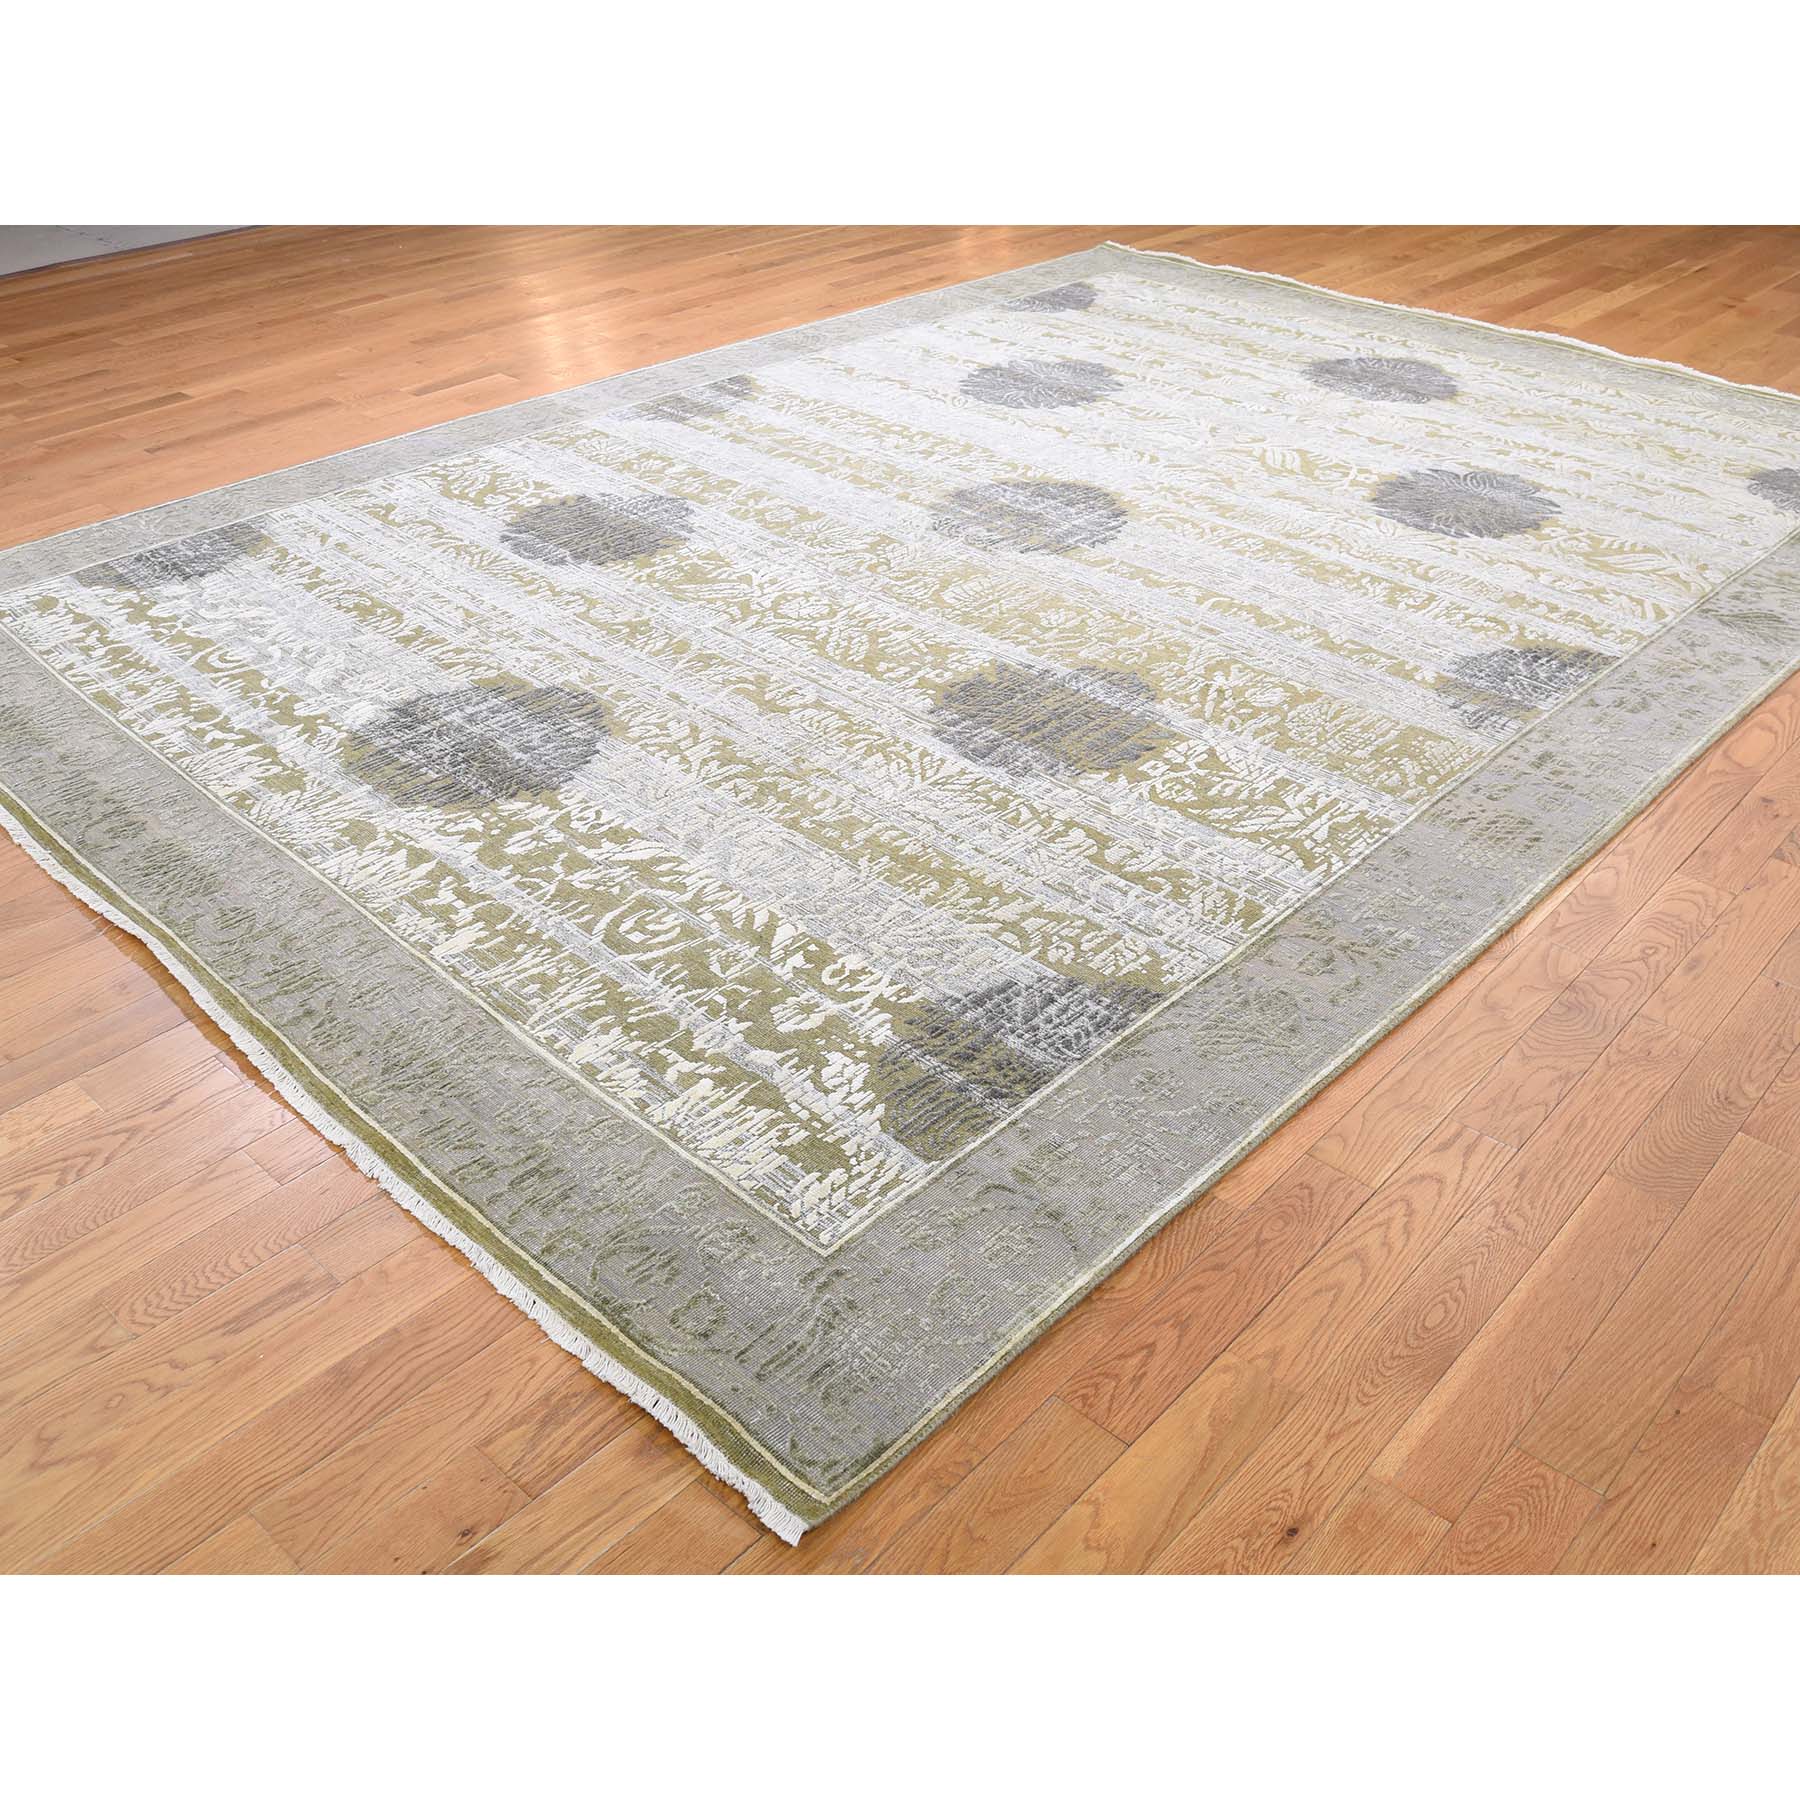 8-9 x12-1  Silk With Textured Wool Hand-Knotted Oriental Rug 